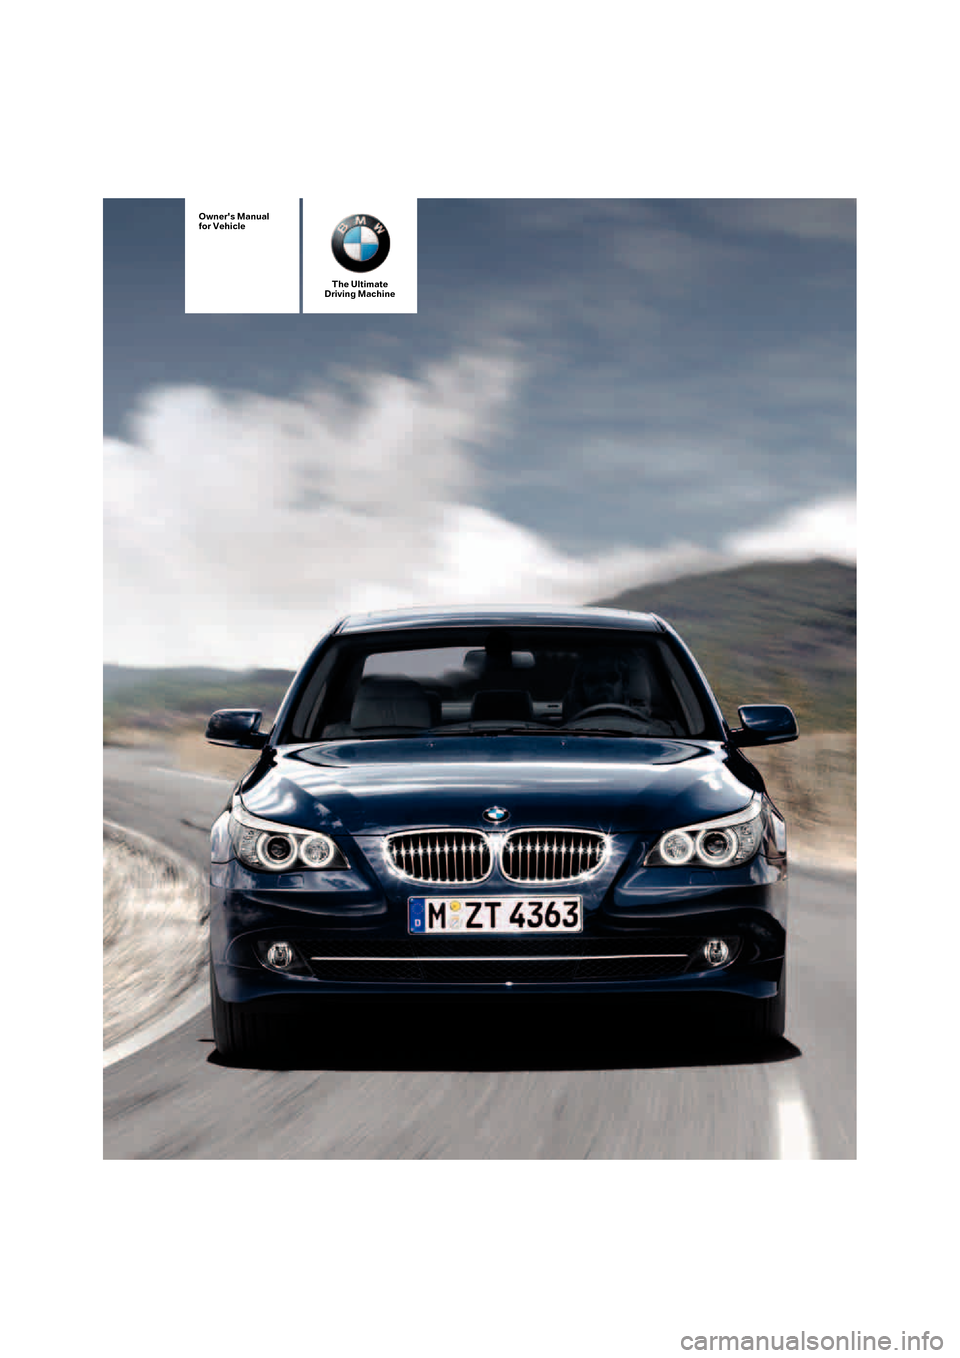 BMW 550I SEDAN 2008 E60 Owners Manual The Ultimate
Driving Machine
Owners Manual
for Vehicle 